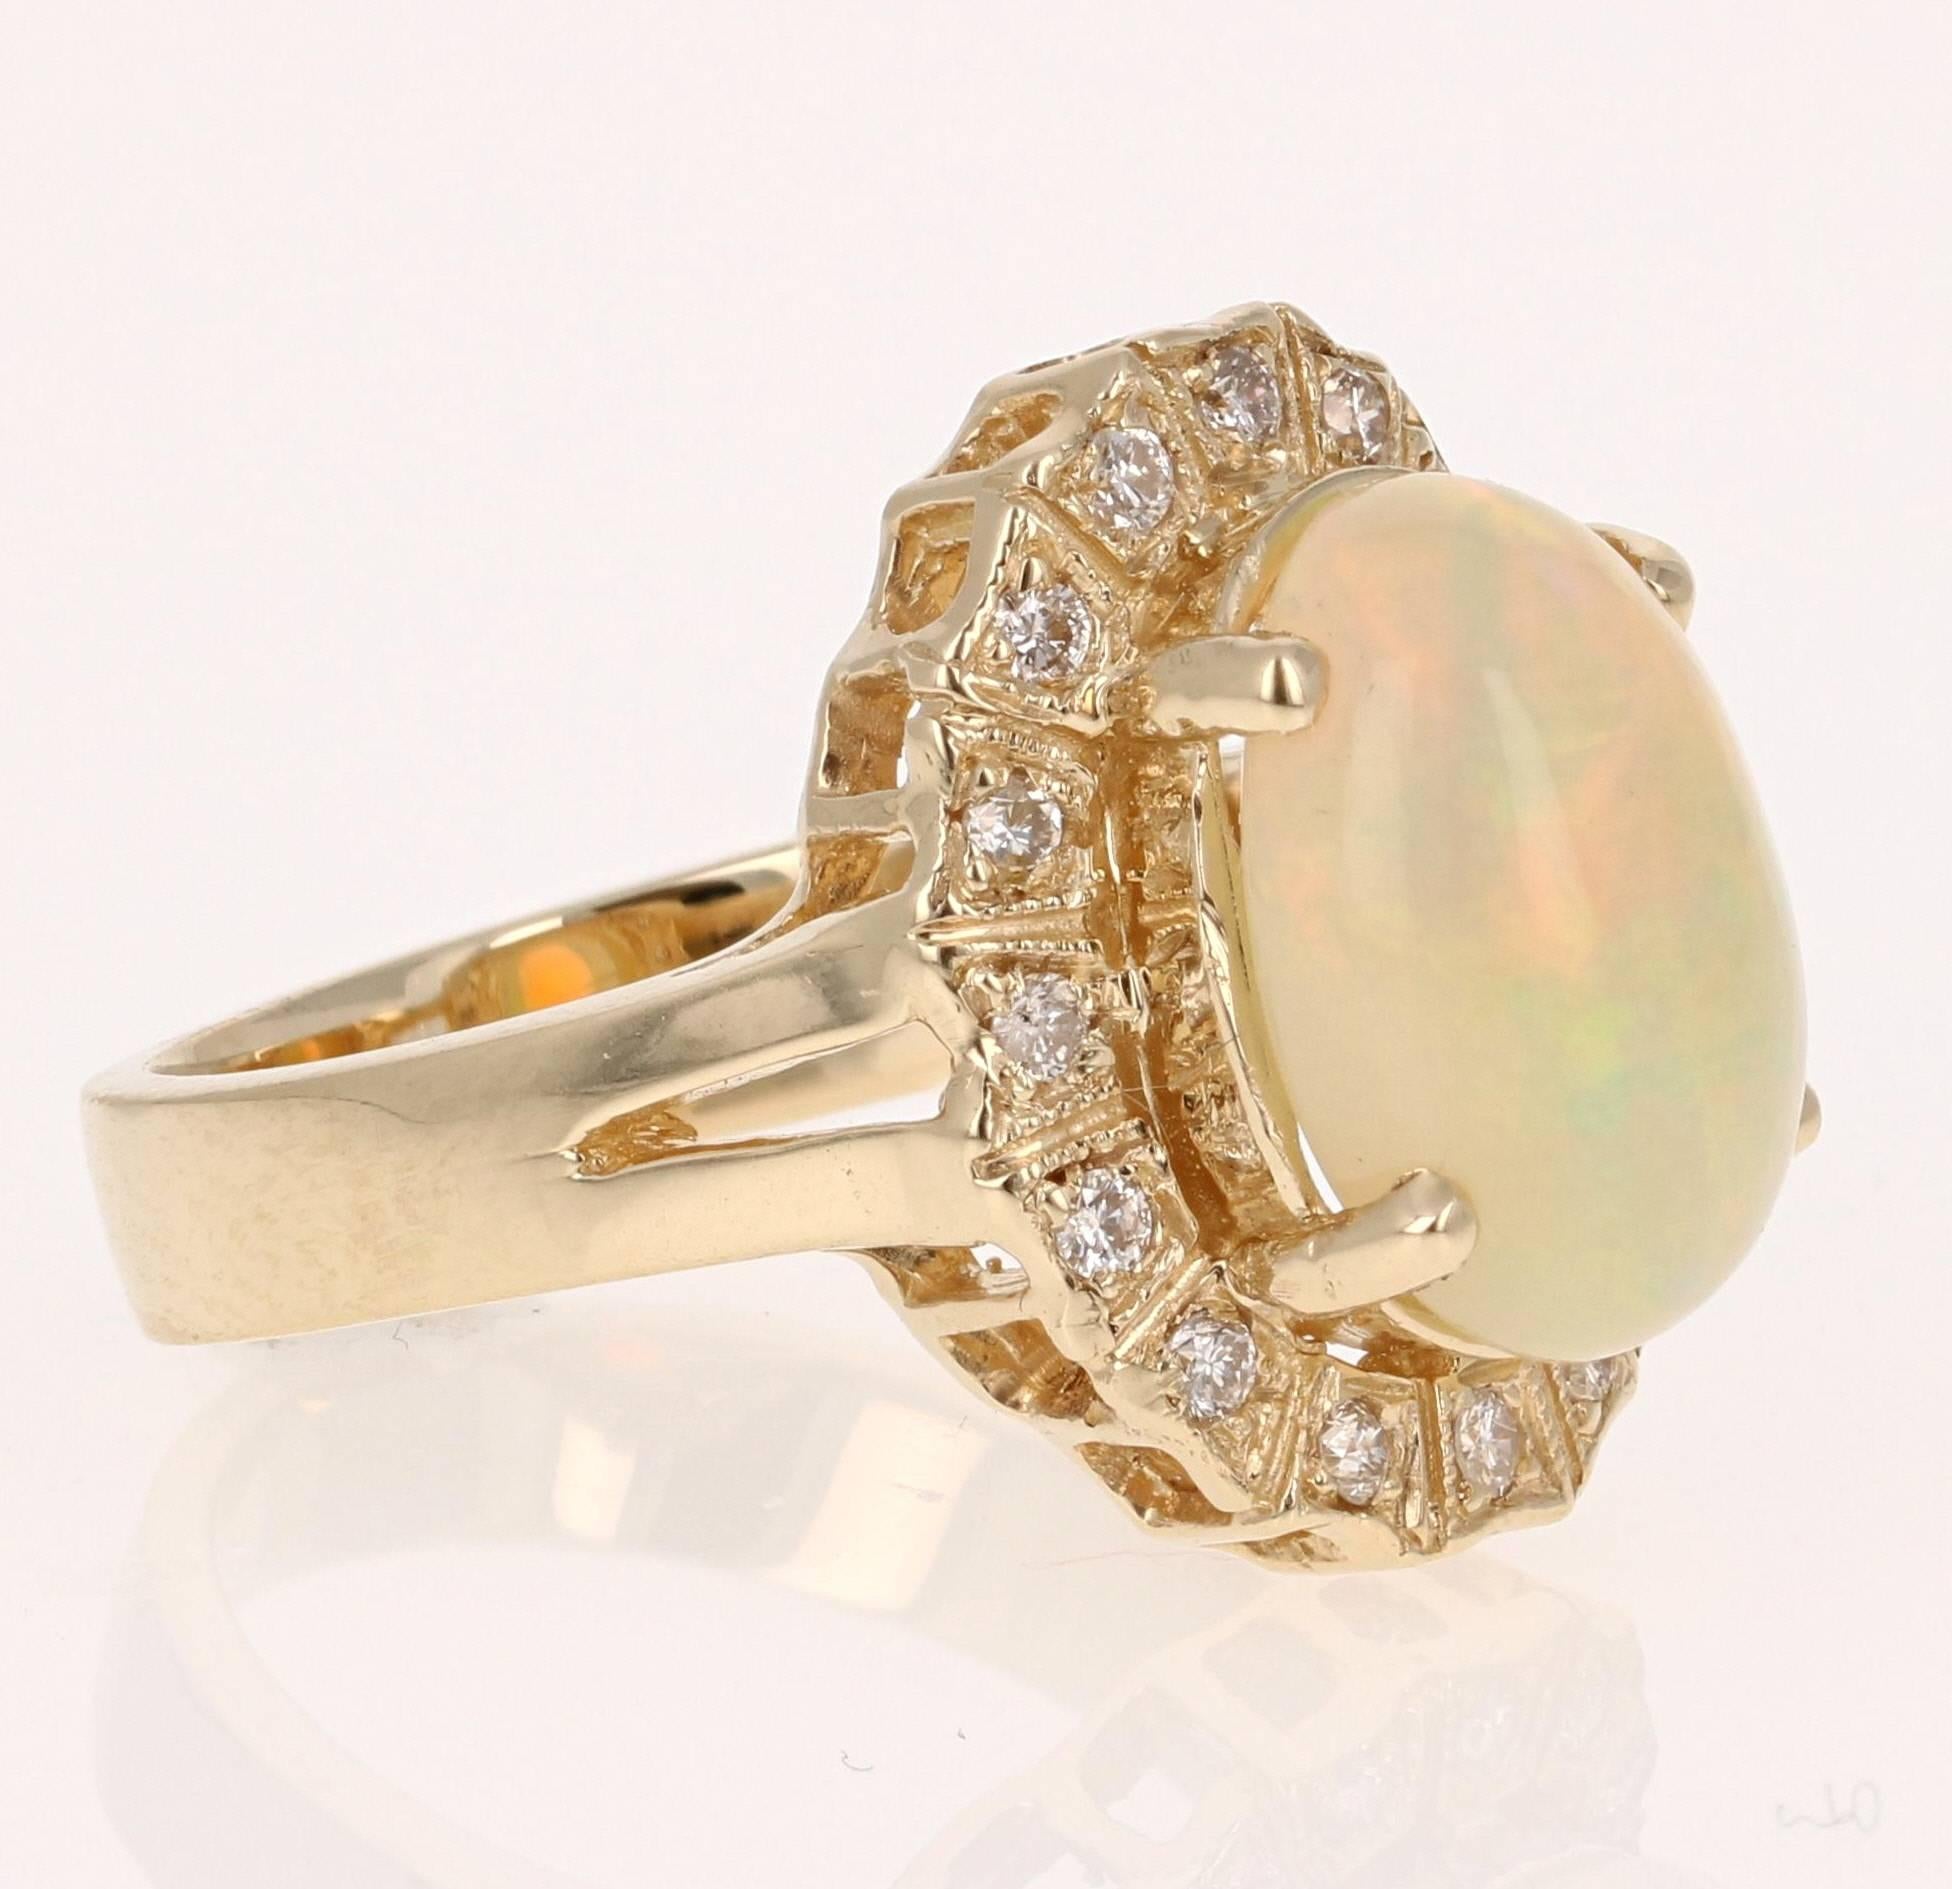 Stunning Opal and Diamond Ring made in a 14K Yellow Gold setting.  The Oval Cut Opal in this ring weighs 3.36 carats and is surrounded by 16 Round Cut Diamonds that weigh 0.27 carat.  The total carat weight of this ring is 3.63 cts.  The ring is a